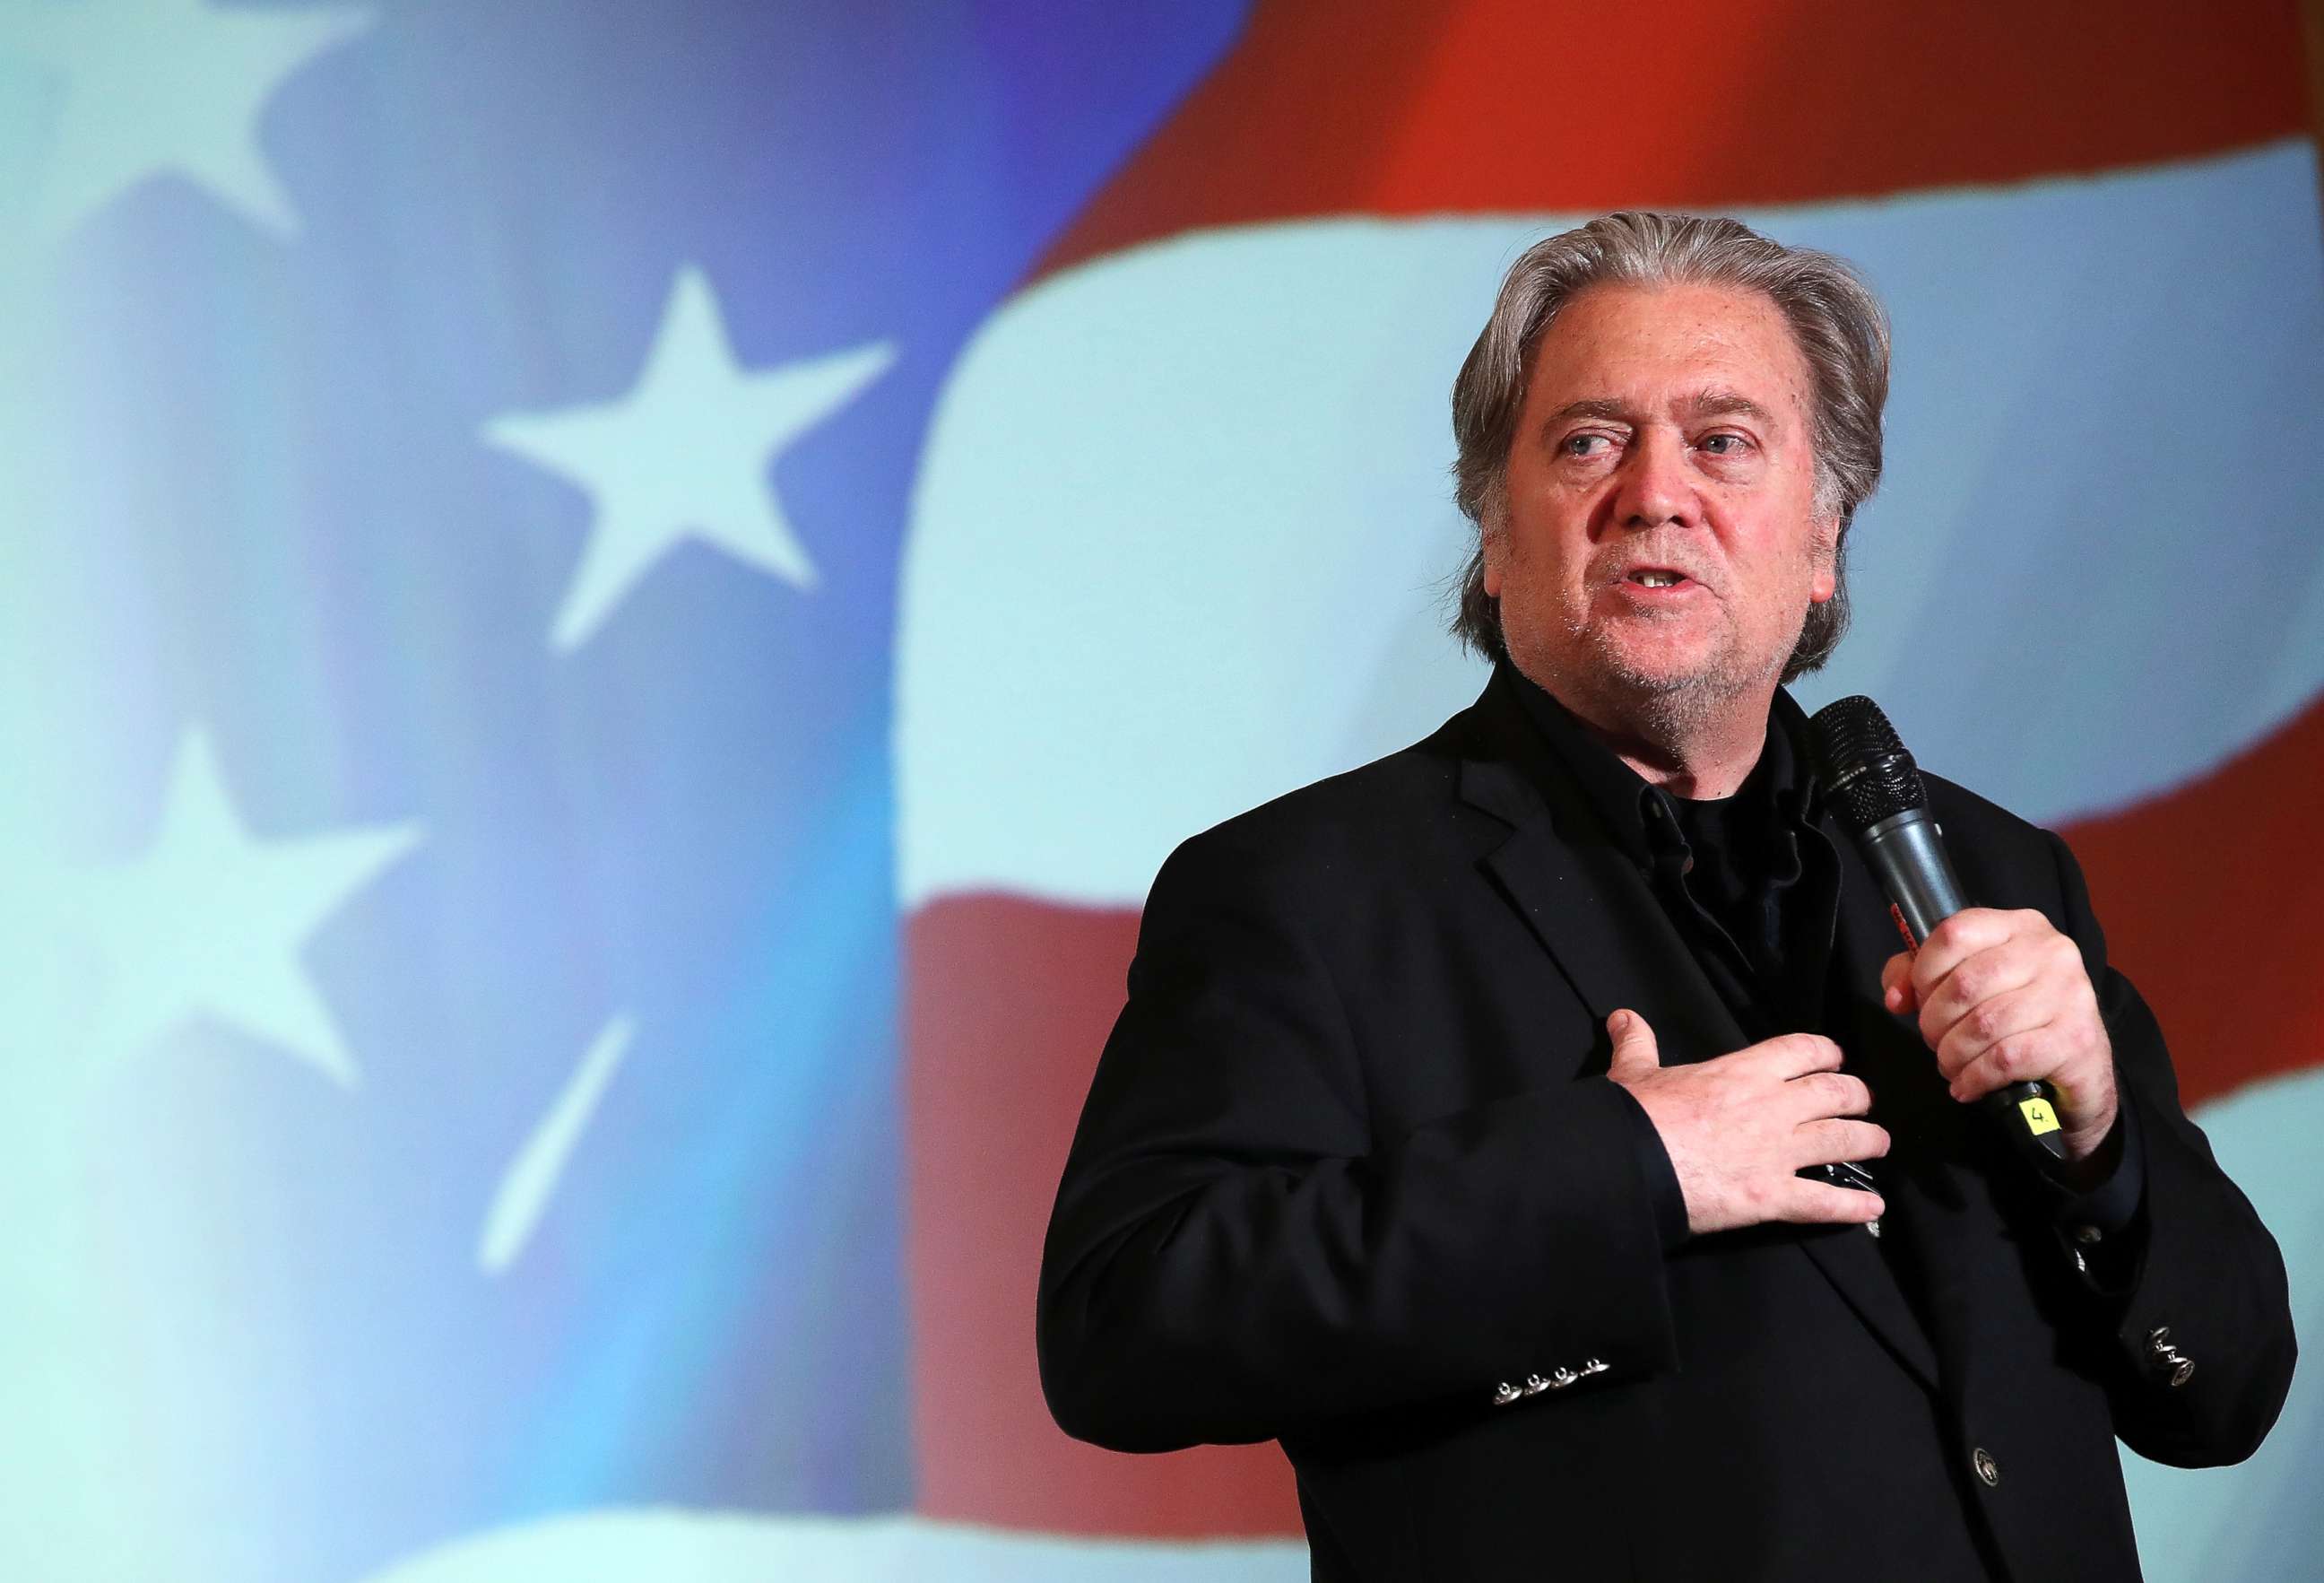 PHOTO: Steve Bannon, former White House Chief Strategist to President Donald Trump, speaks at a debate with Lanny Davis, former special counsel to Bill Clinton, at Zofin Palace, May 22, 2018, in Prague, Czech Republic.